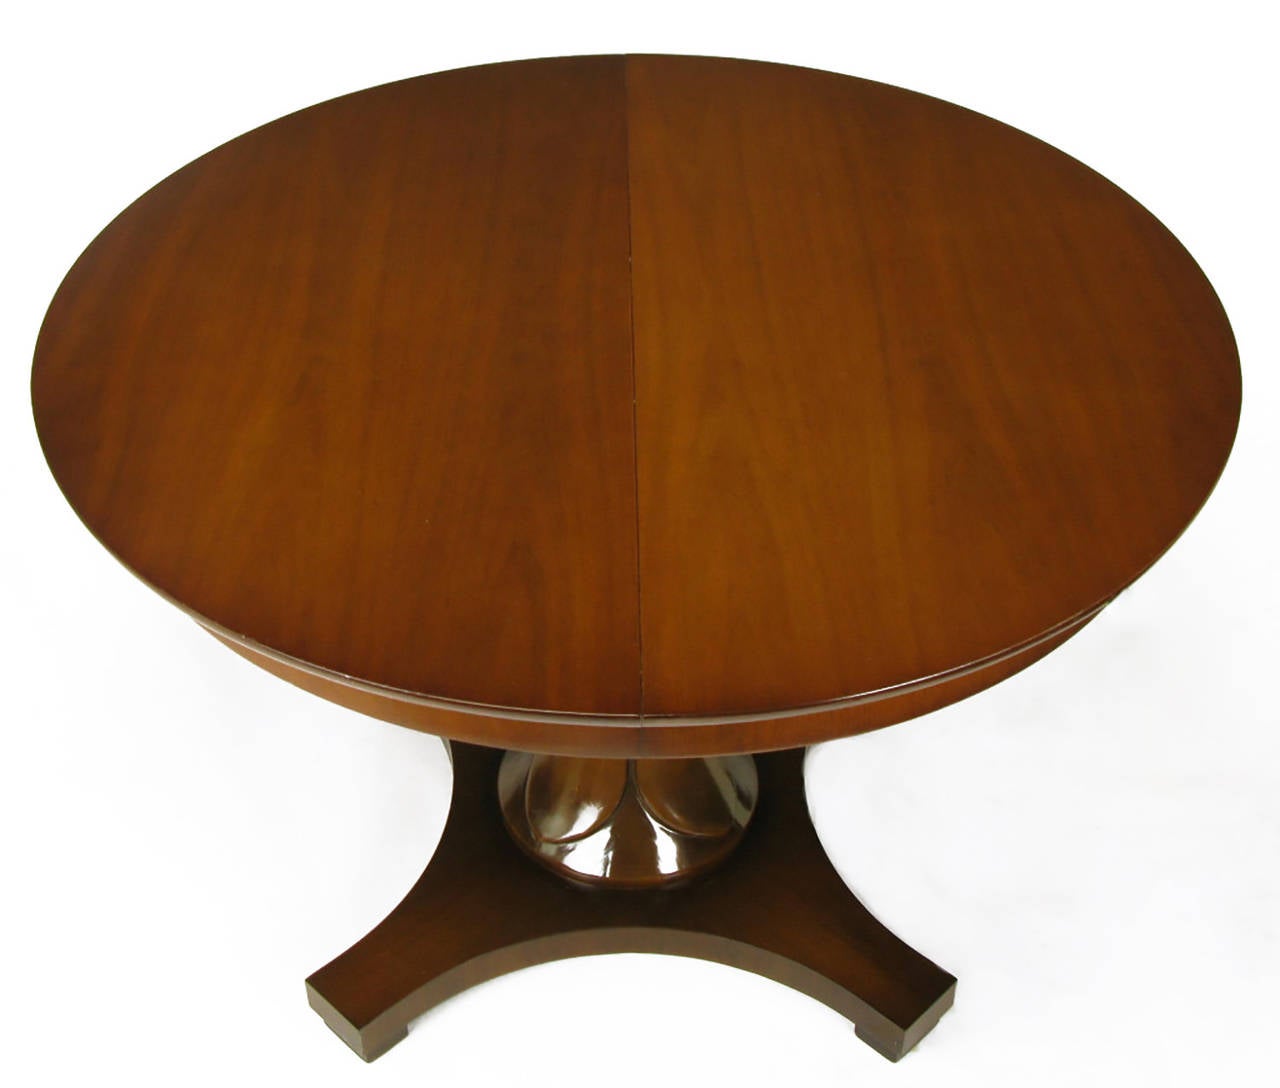 Walnut pedestal dining table with reverse quatrefoil base, designed by Lorin Jackson & Lee Stone for Drexel. Jackson is best known for his designs for Grosfeld House. Hour glass shaped pedestal with center ring and flower petal carved upper and